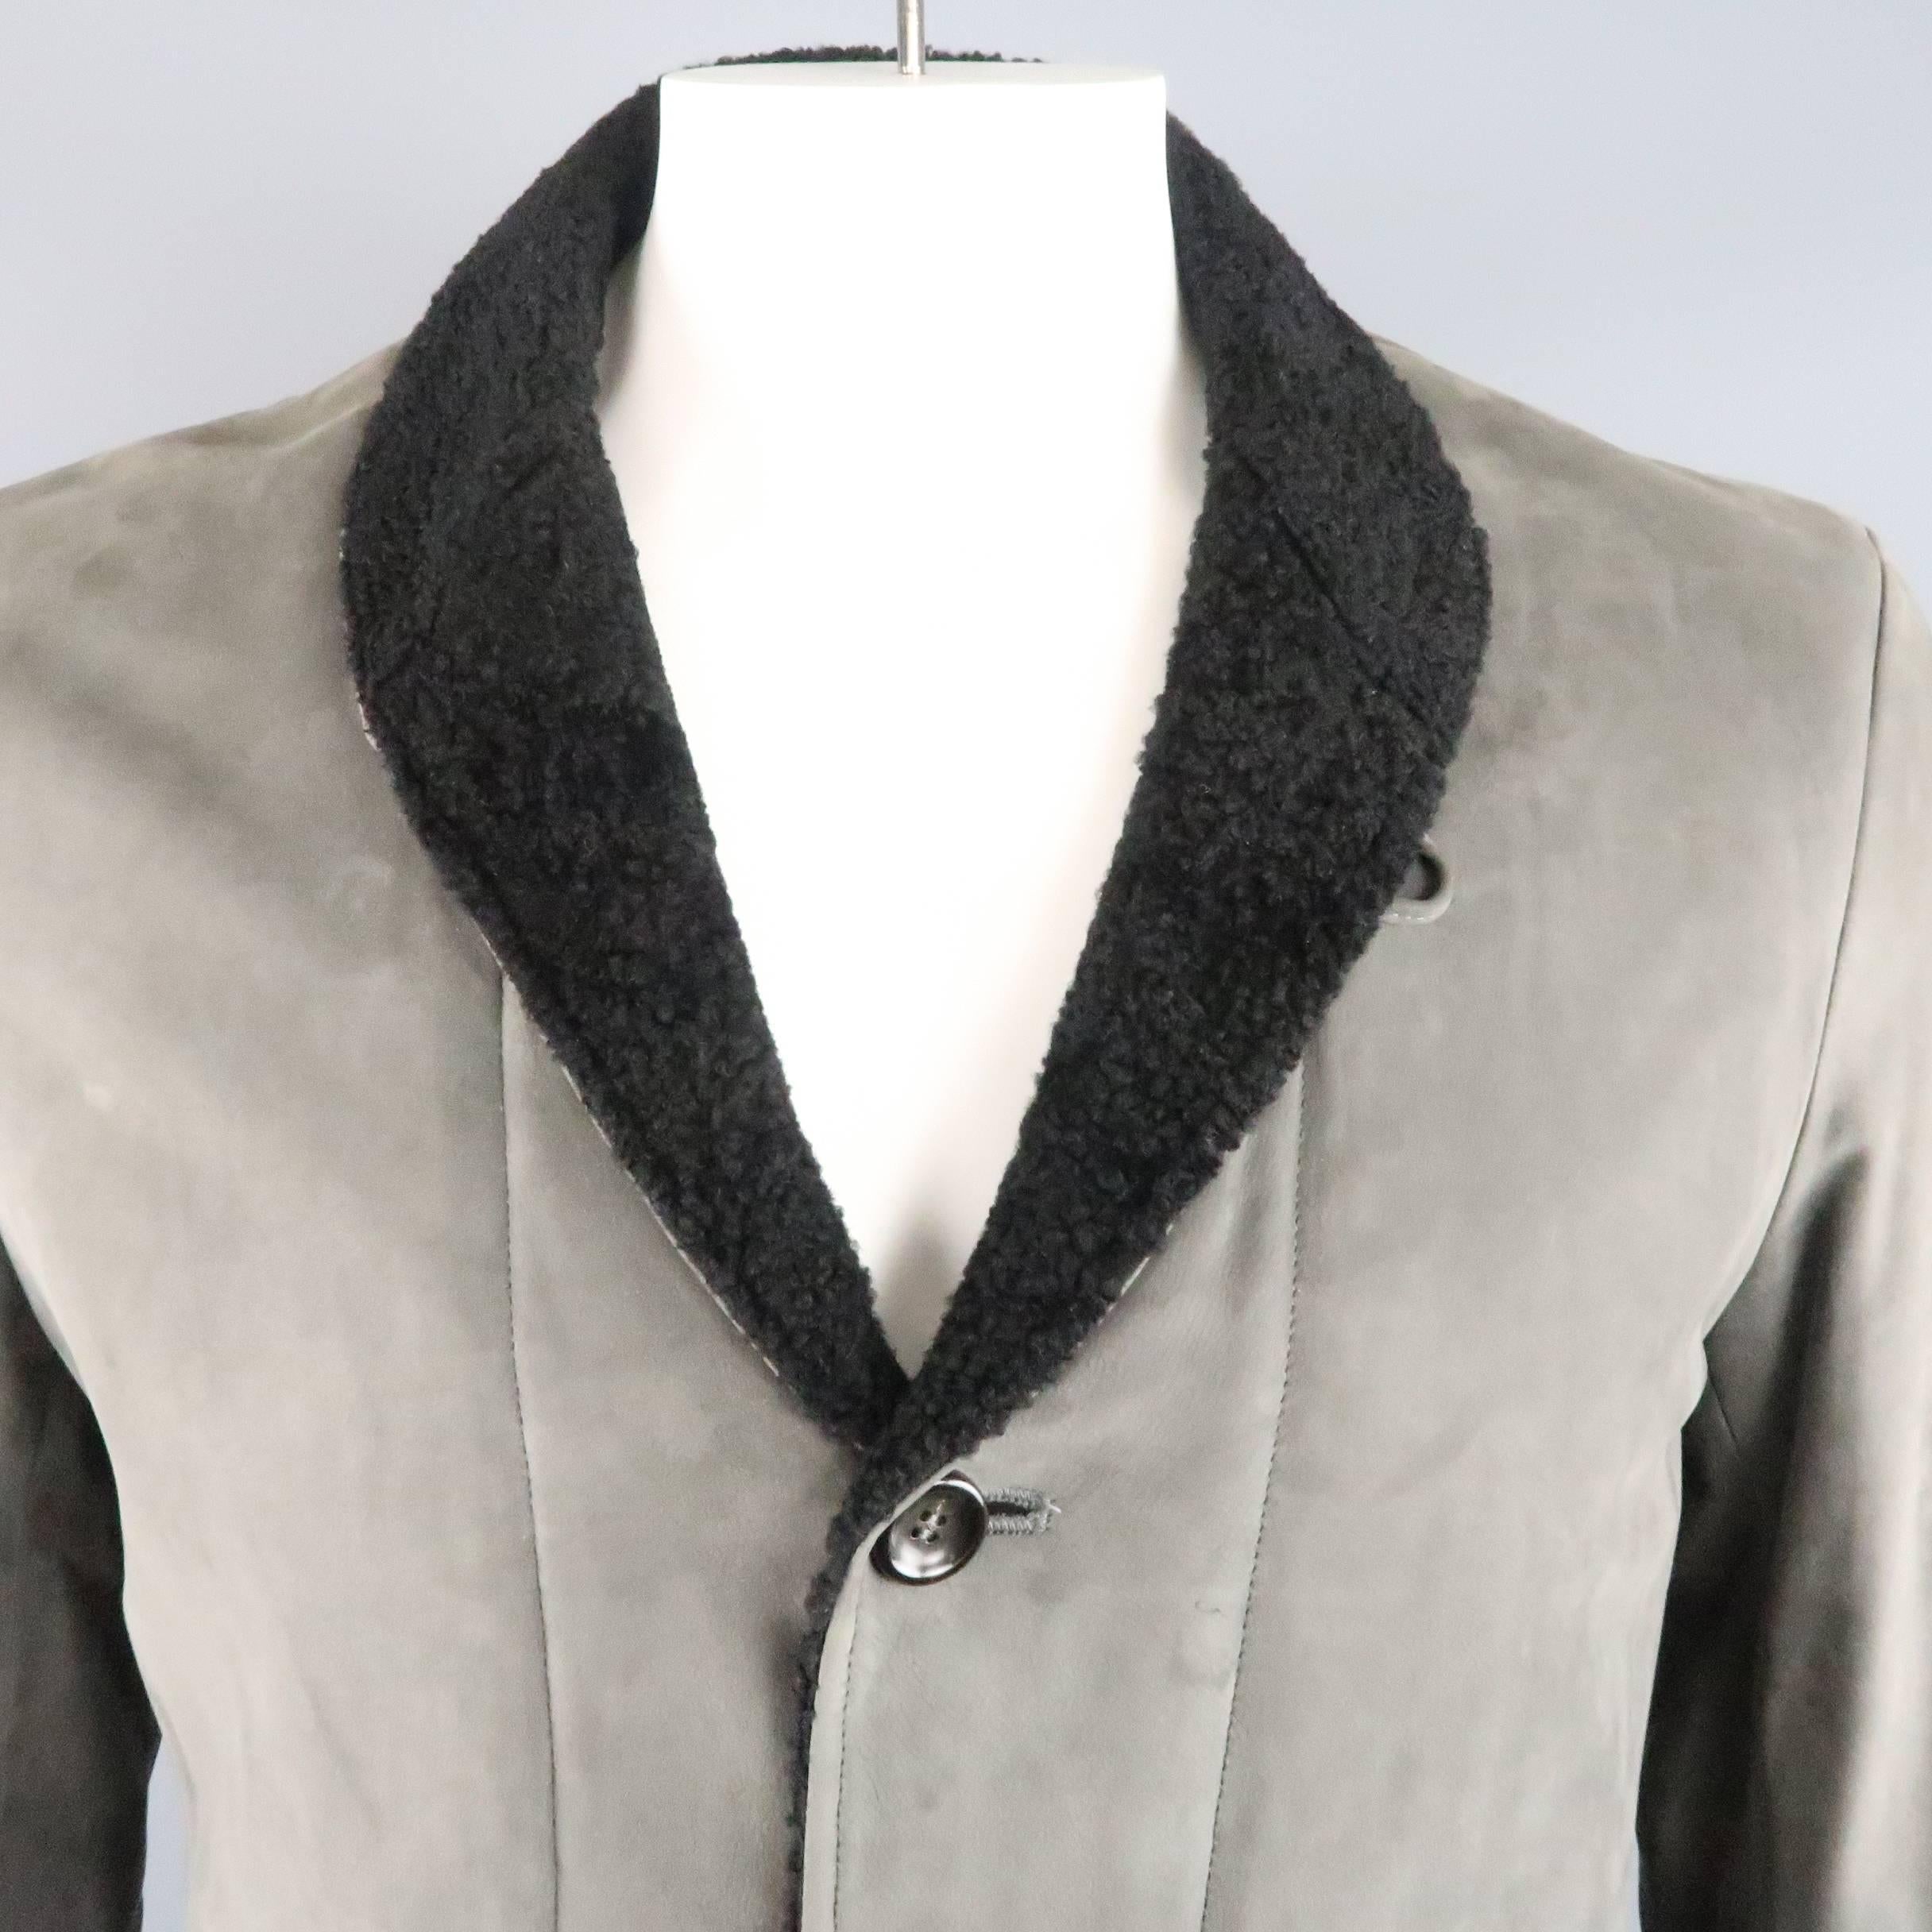 ARMANI COLEZZIONI jacket comes in a soft slate gray suede nubuck calfskin leather and features a black shearling shawl collar, three button front, and fabric liner. Small mark at chest.
 
Good Pre-Owned Condition.
Marked: IT 40
 
Measurements:
